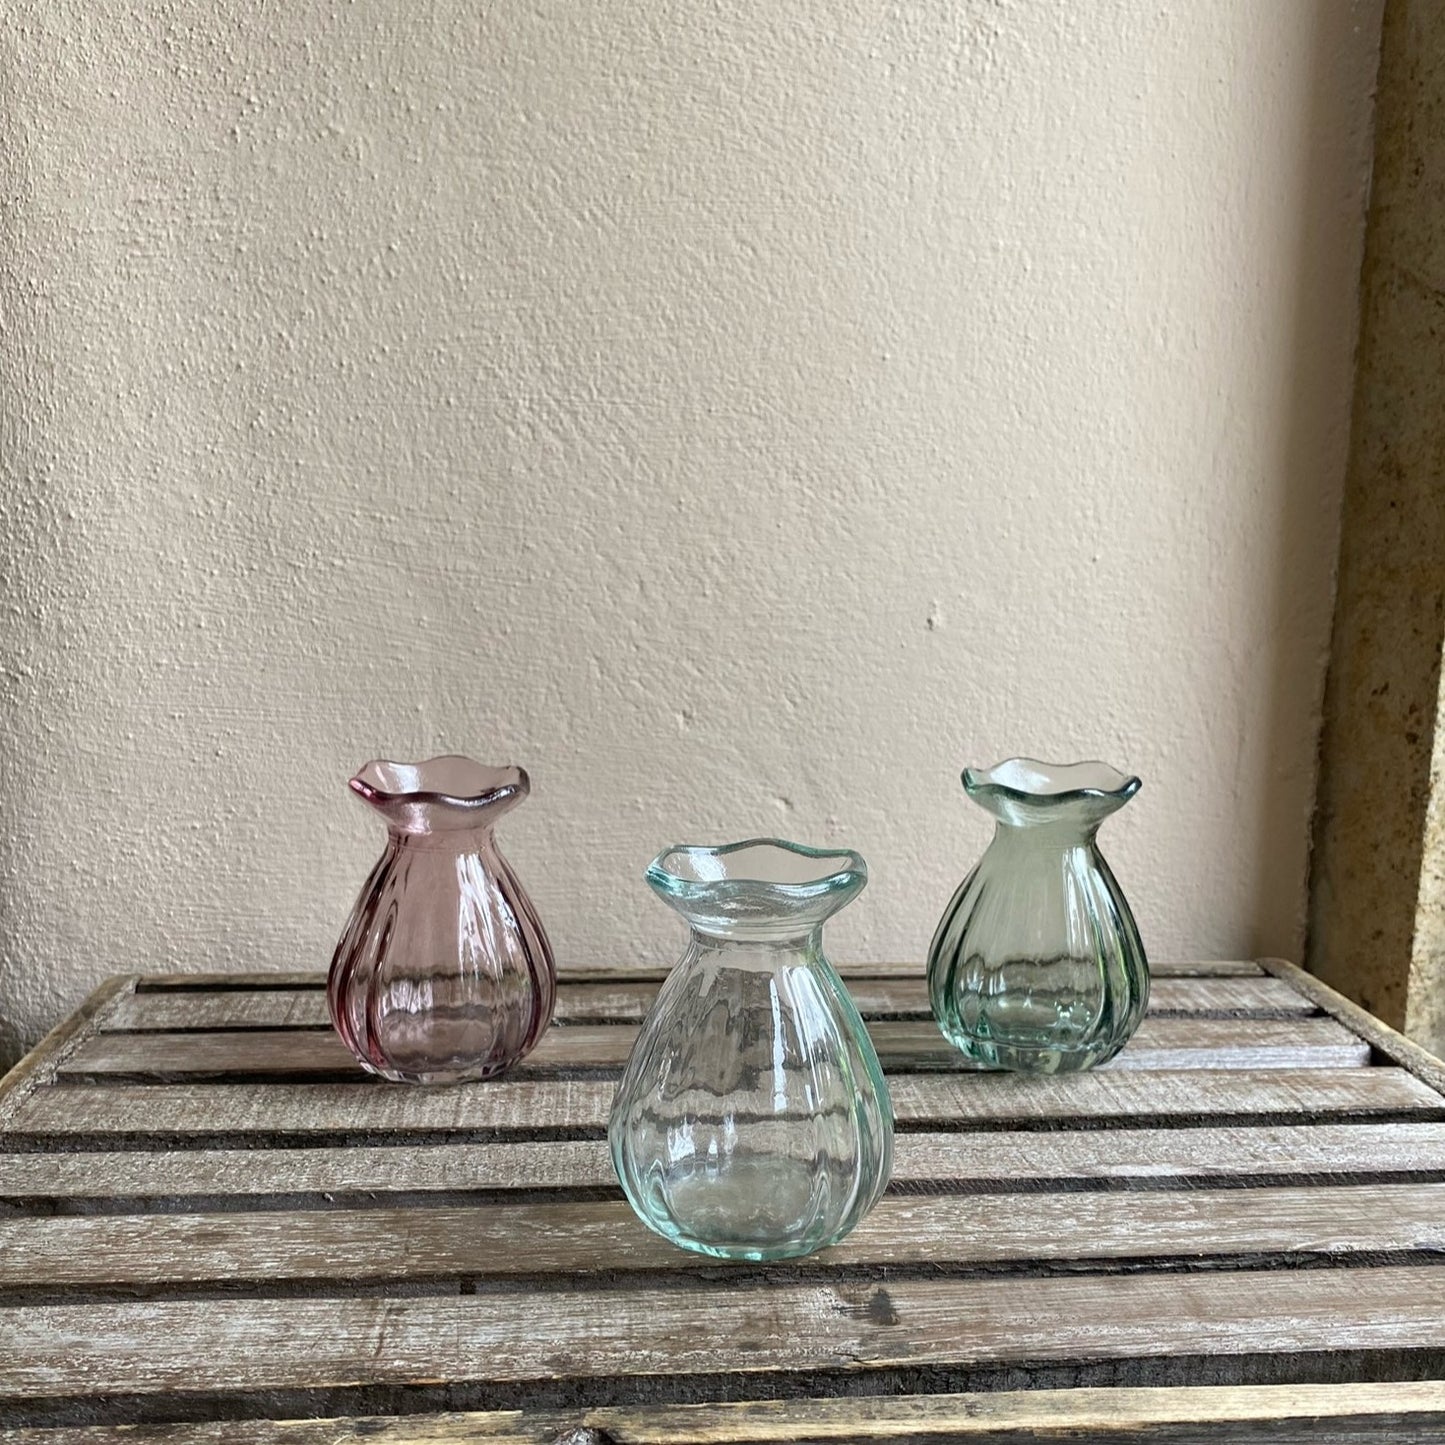 A Trio of Pretty Bud Vases in delicate pink, green and clear glass - including a posies of seasonal flowers